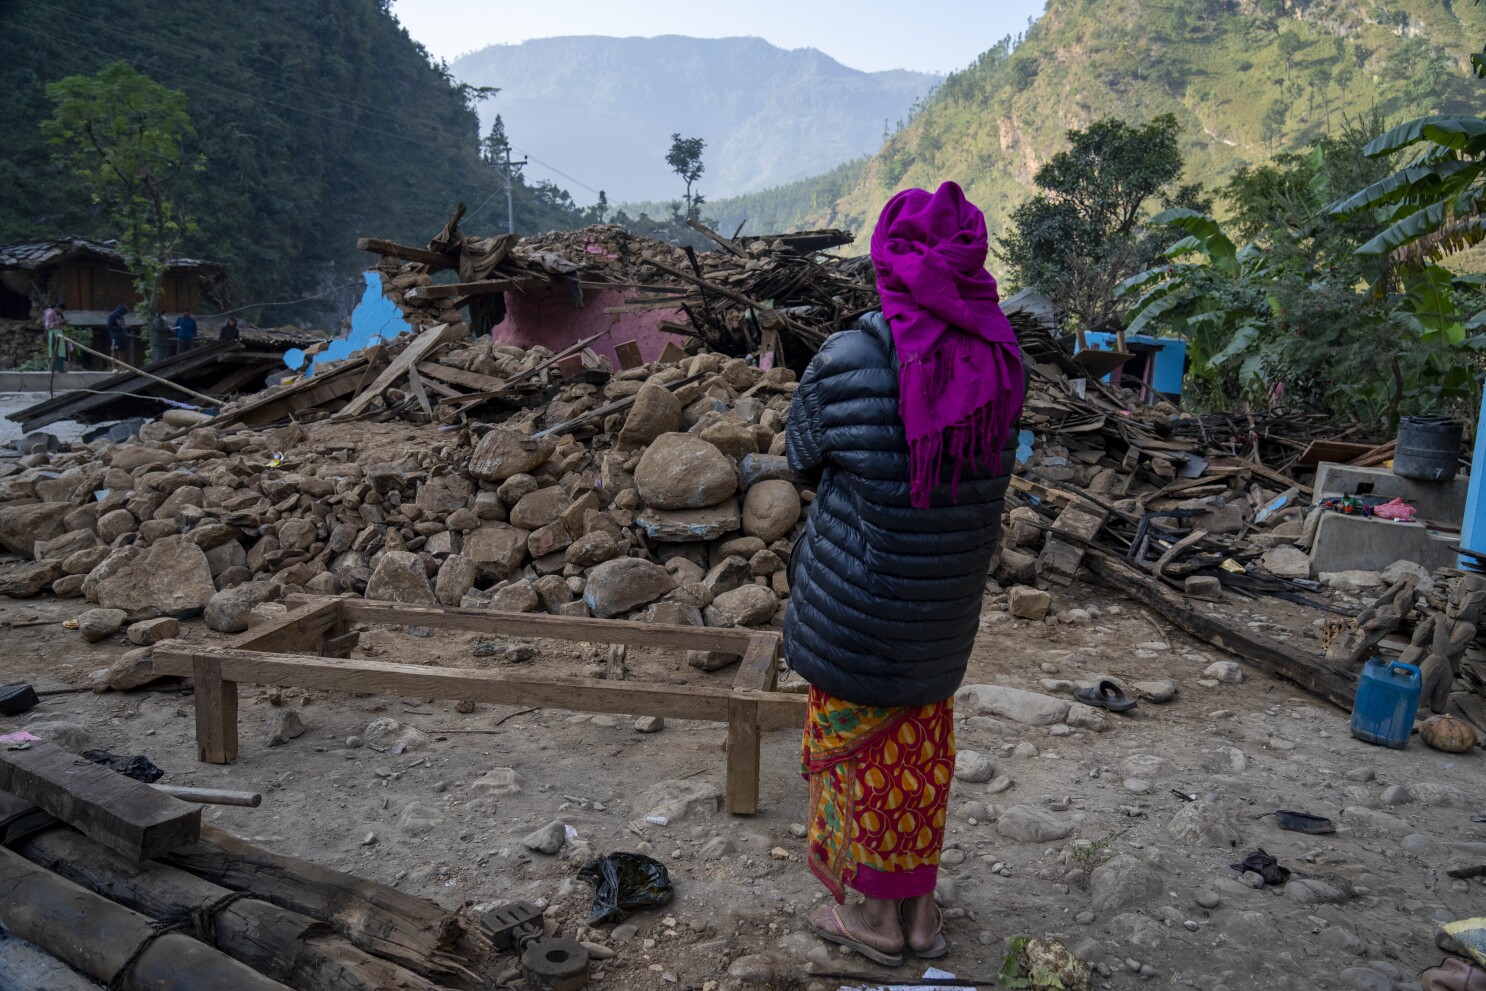 Aid trickles in as survivors salvage belongings from rubble in Nepal  villages struck by earthquake | AP News